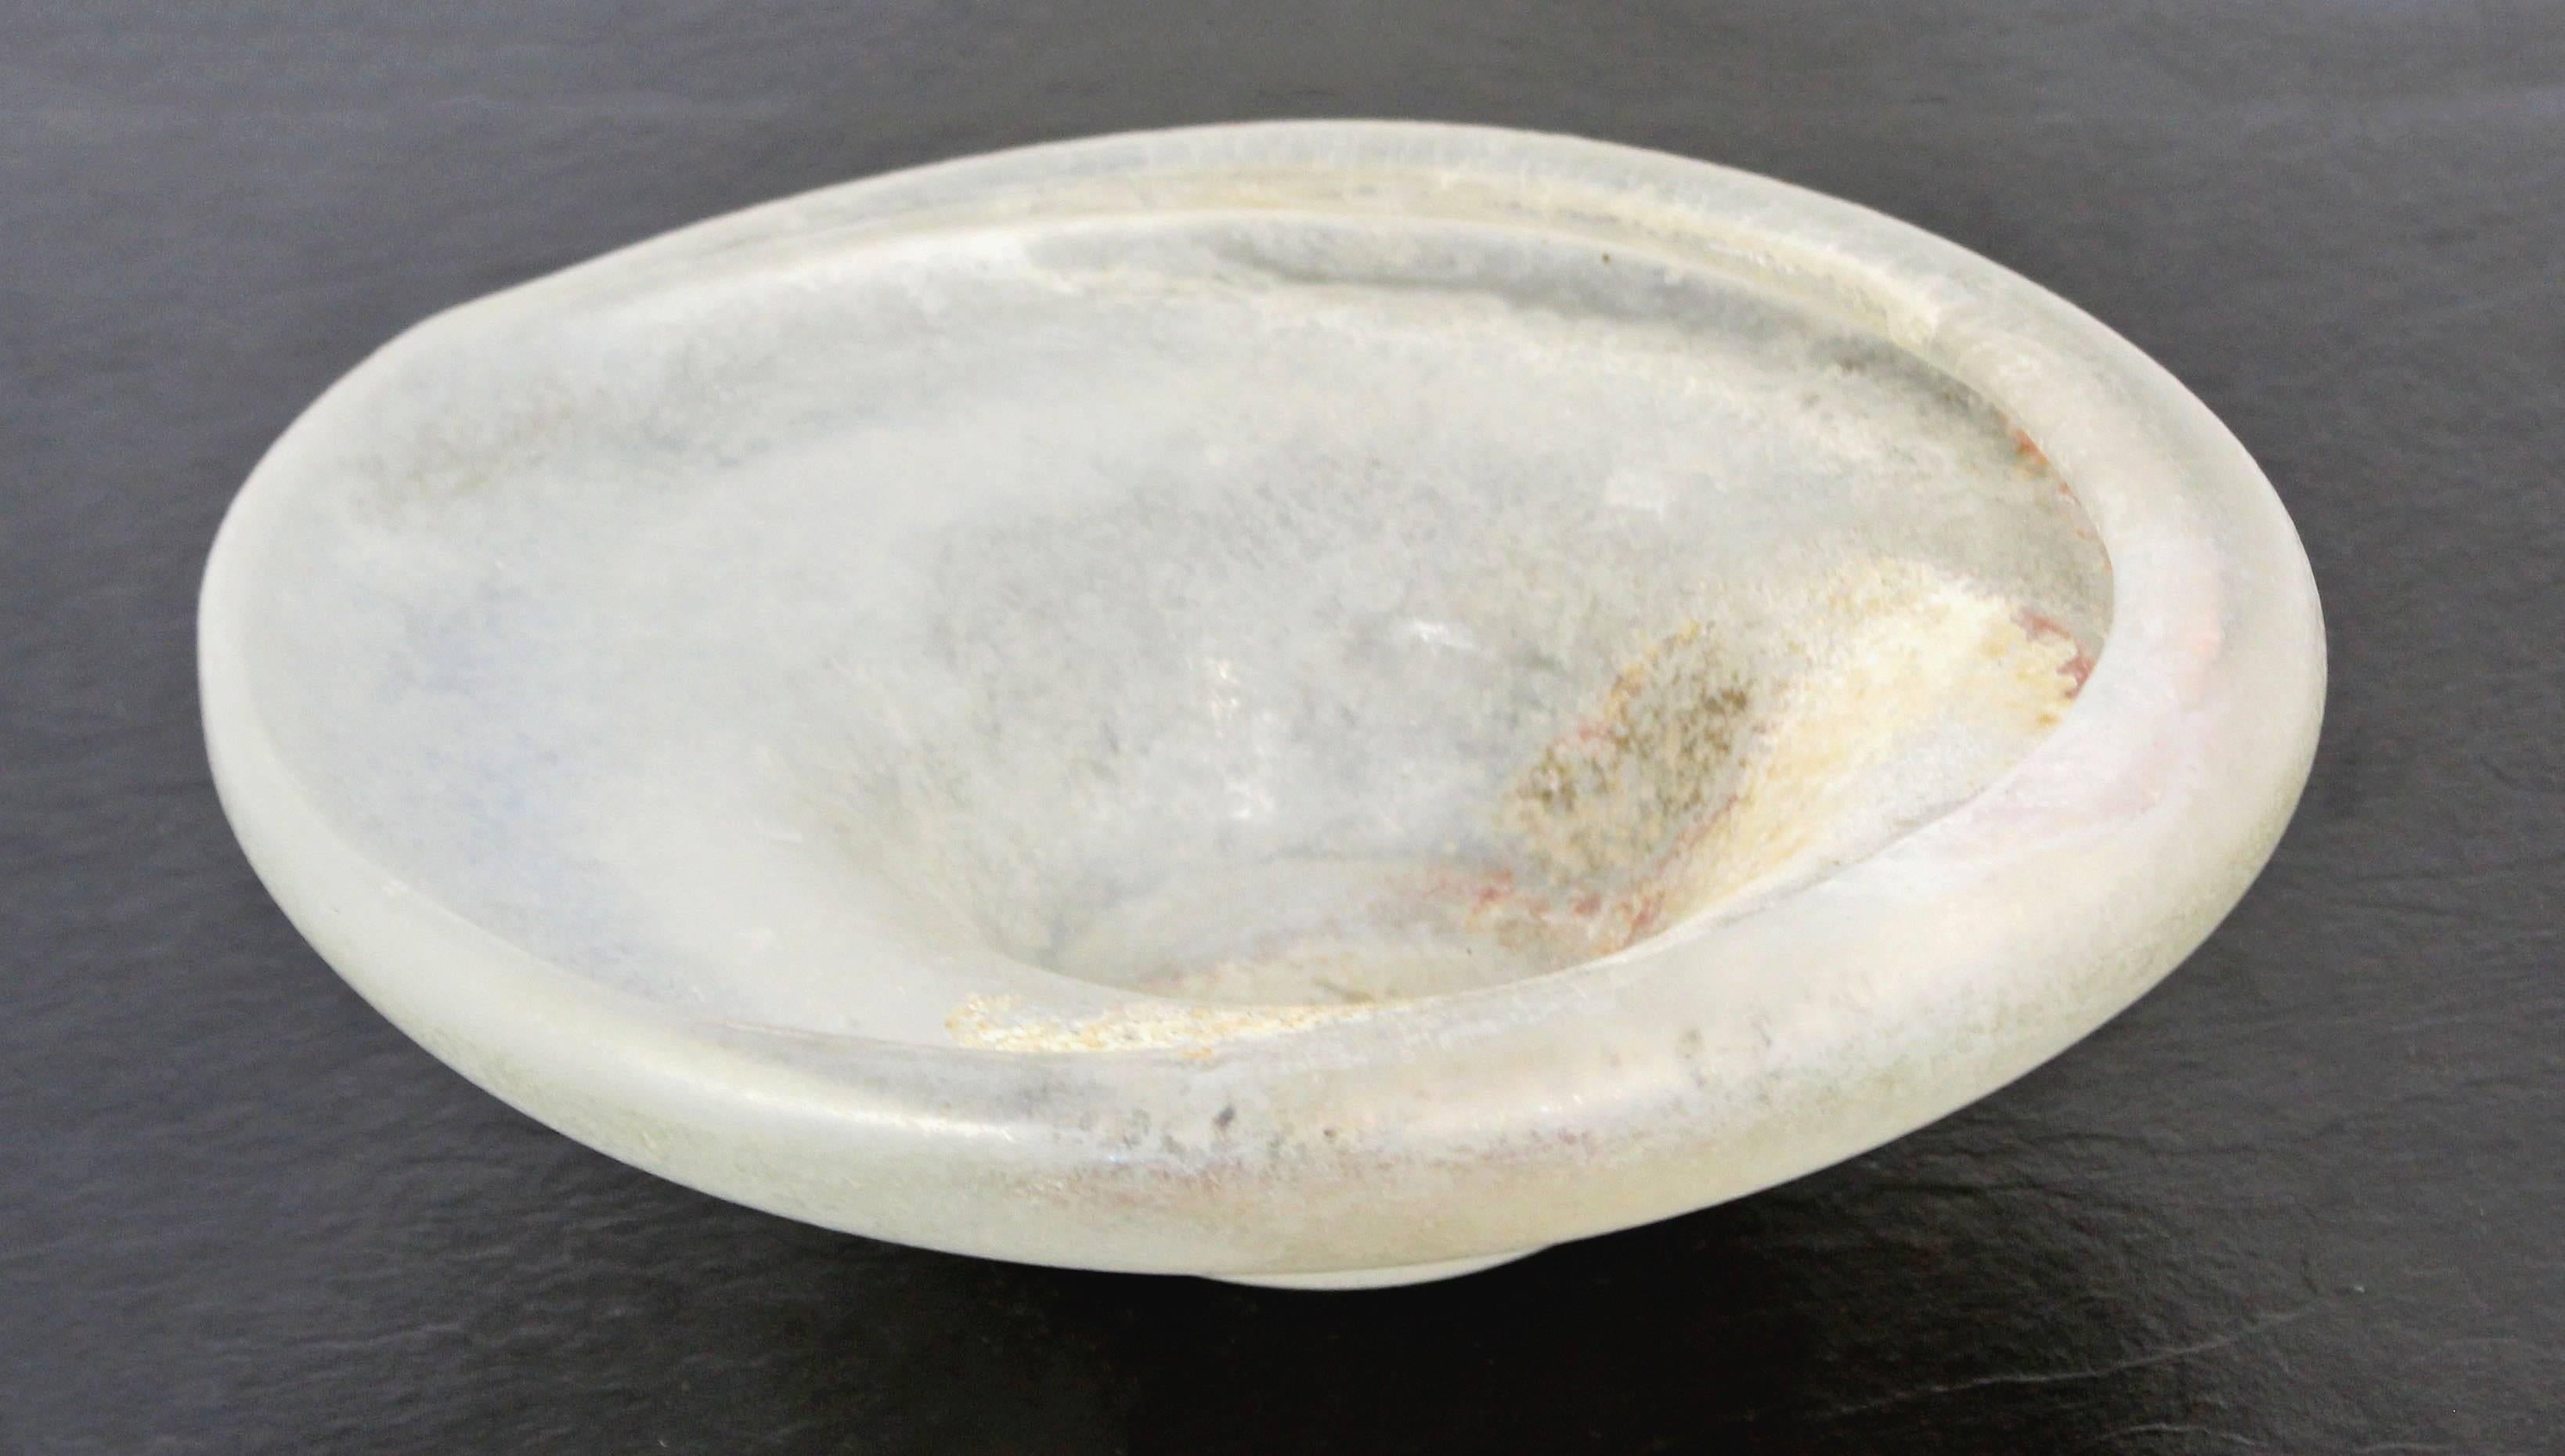 For your consideration is a gorgeous, frosted glass art bowl or candy dish, attributed to Cenedese, circa the 1960s. In excellent condition. The dimensions are 9.75